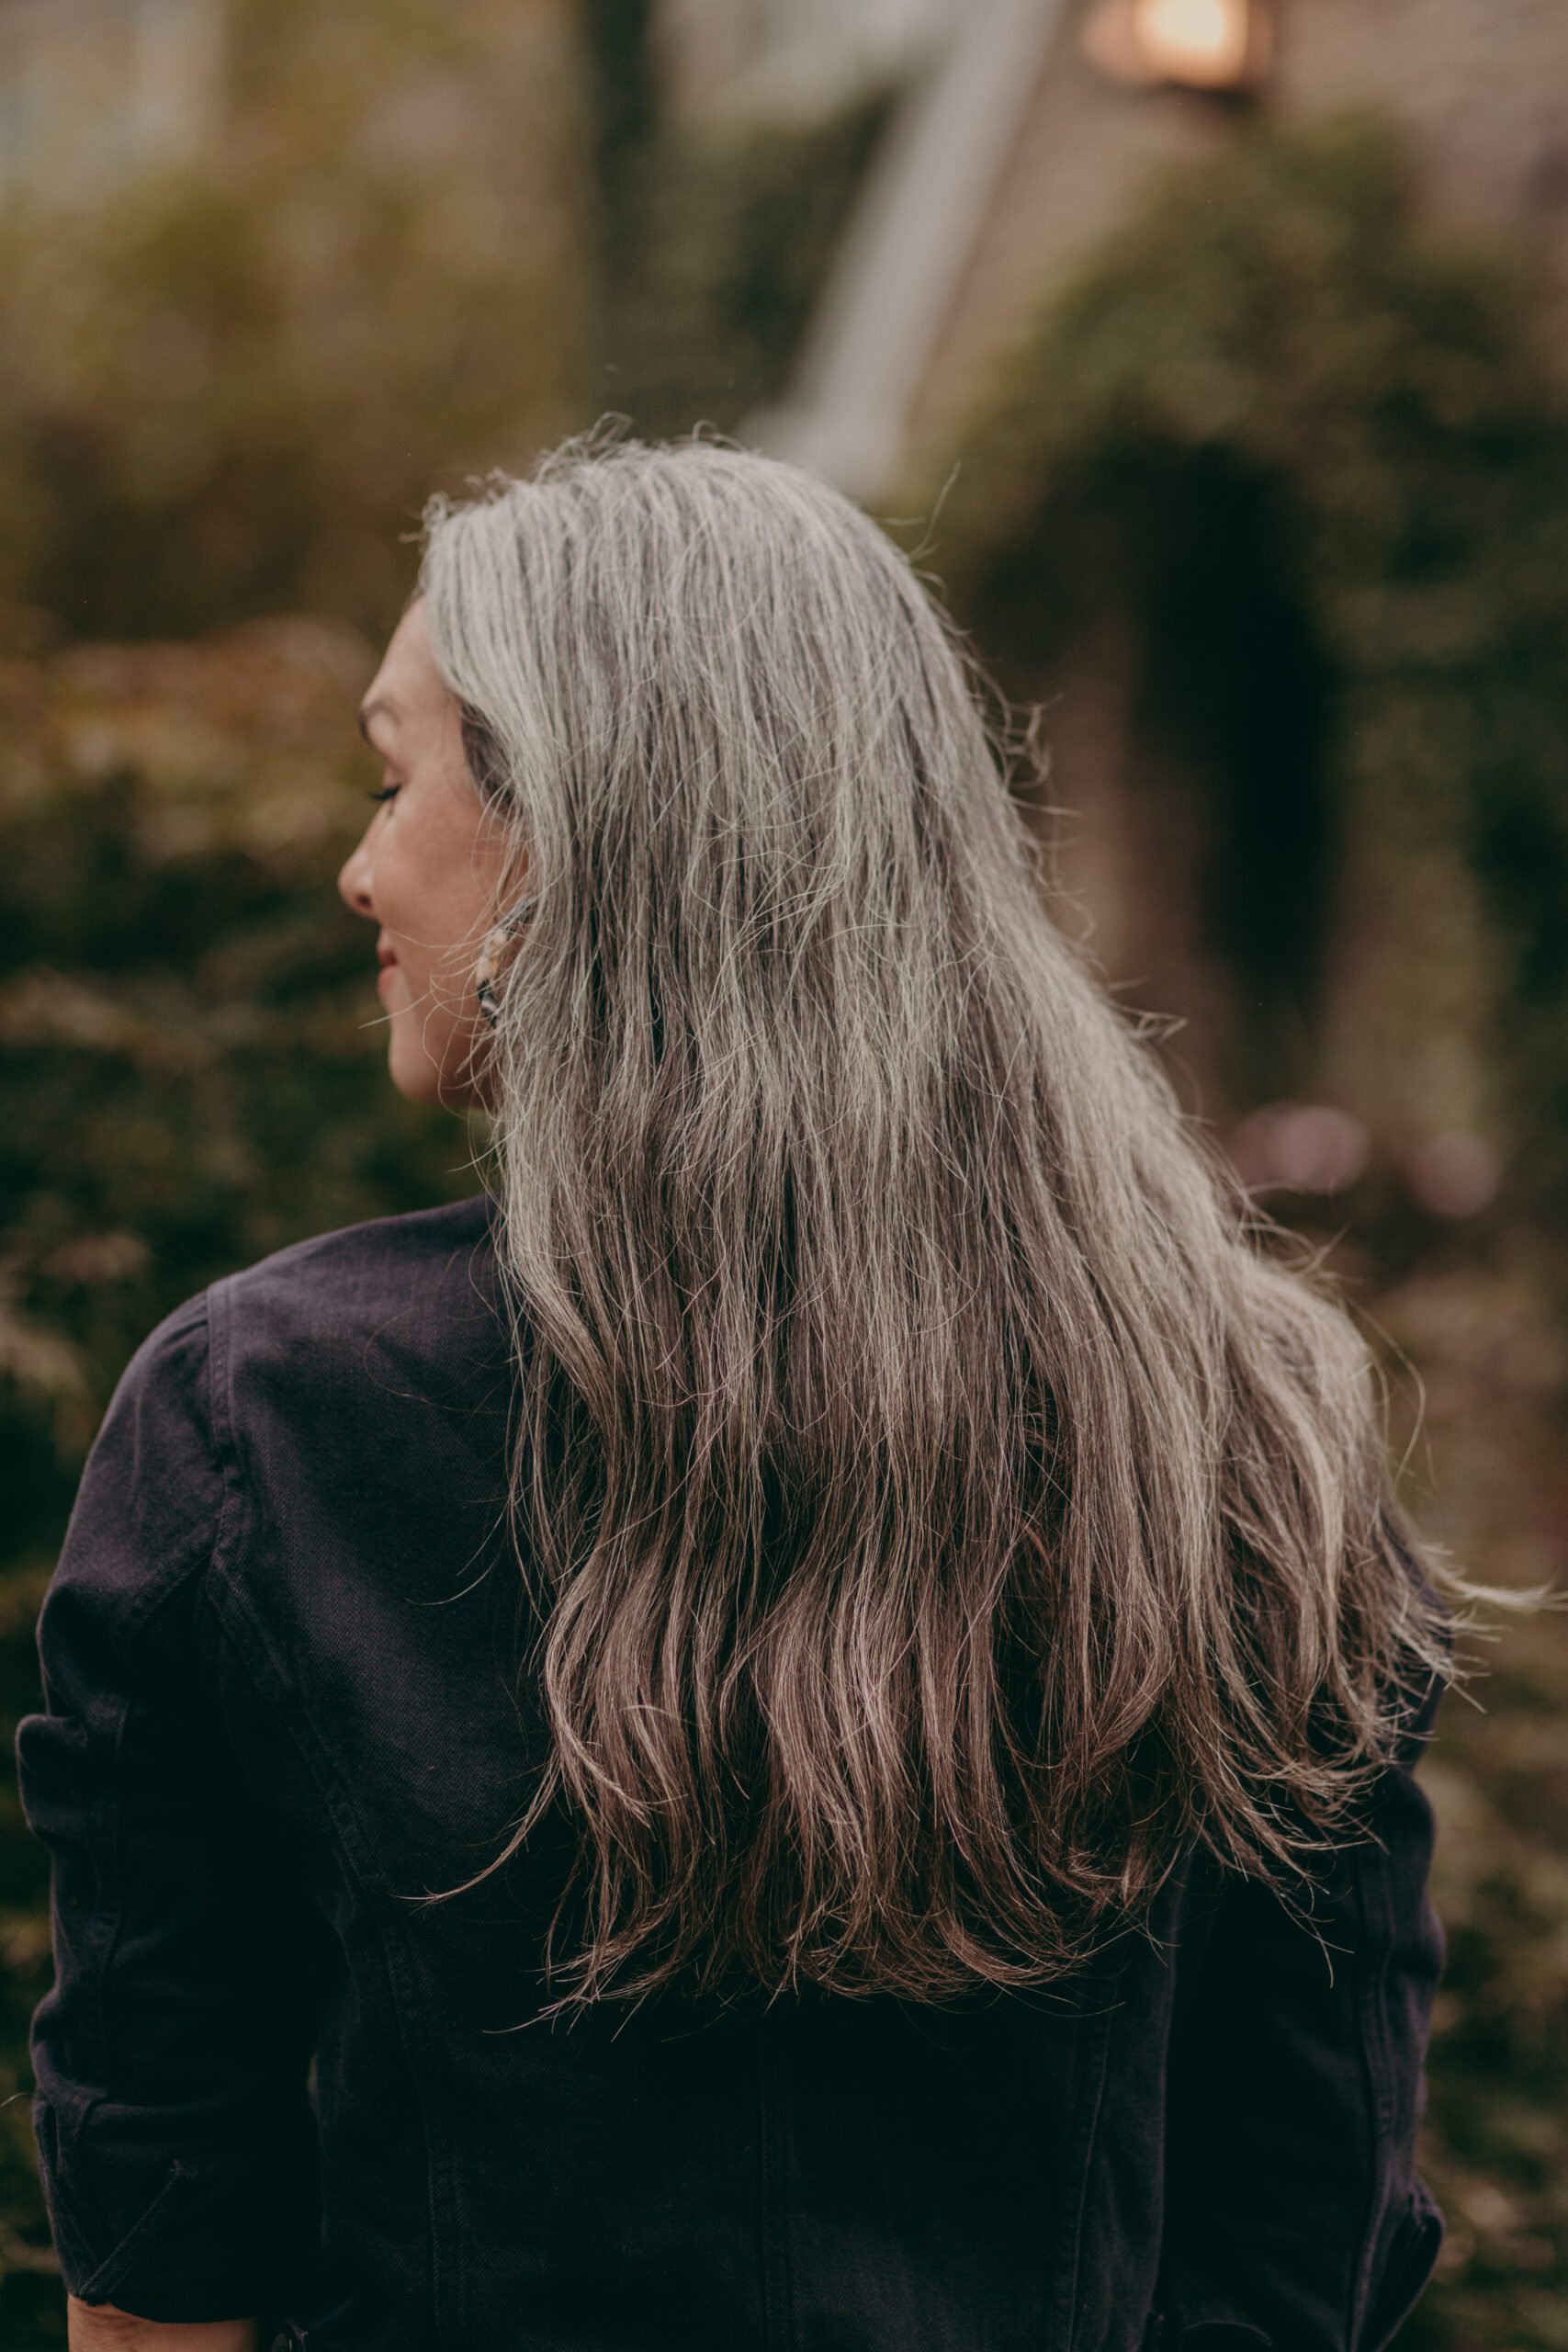 The backside of a woman with long wavy gray hair's head.